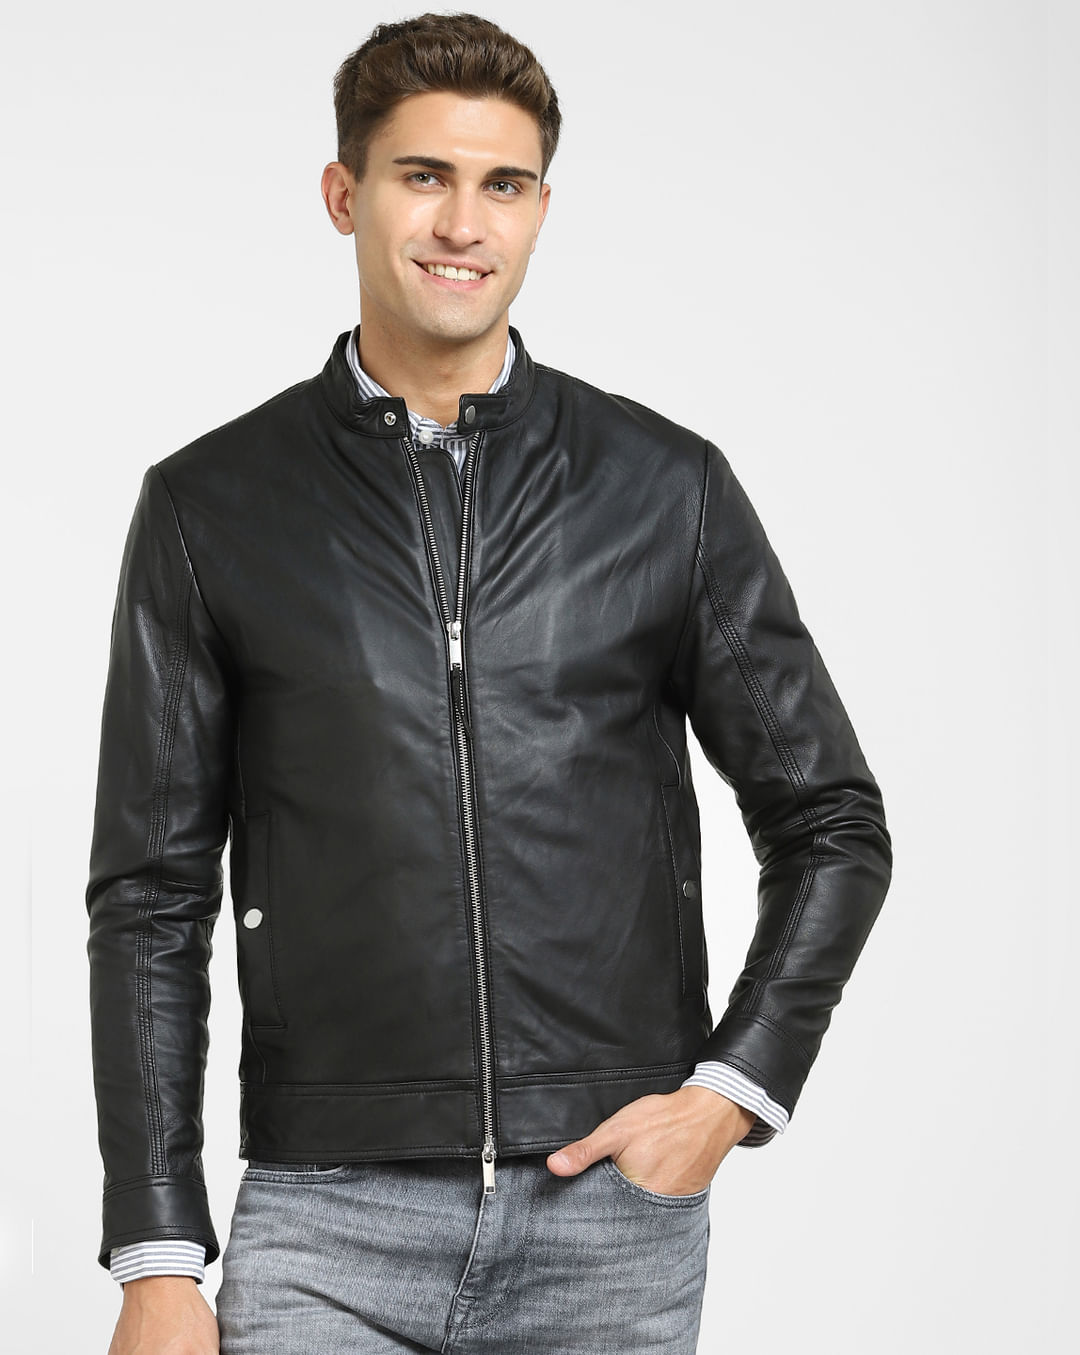 Online Shopping for Men's Clothing and Accessories: SELECTED HOMME